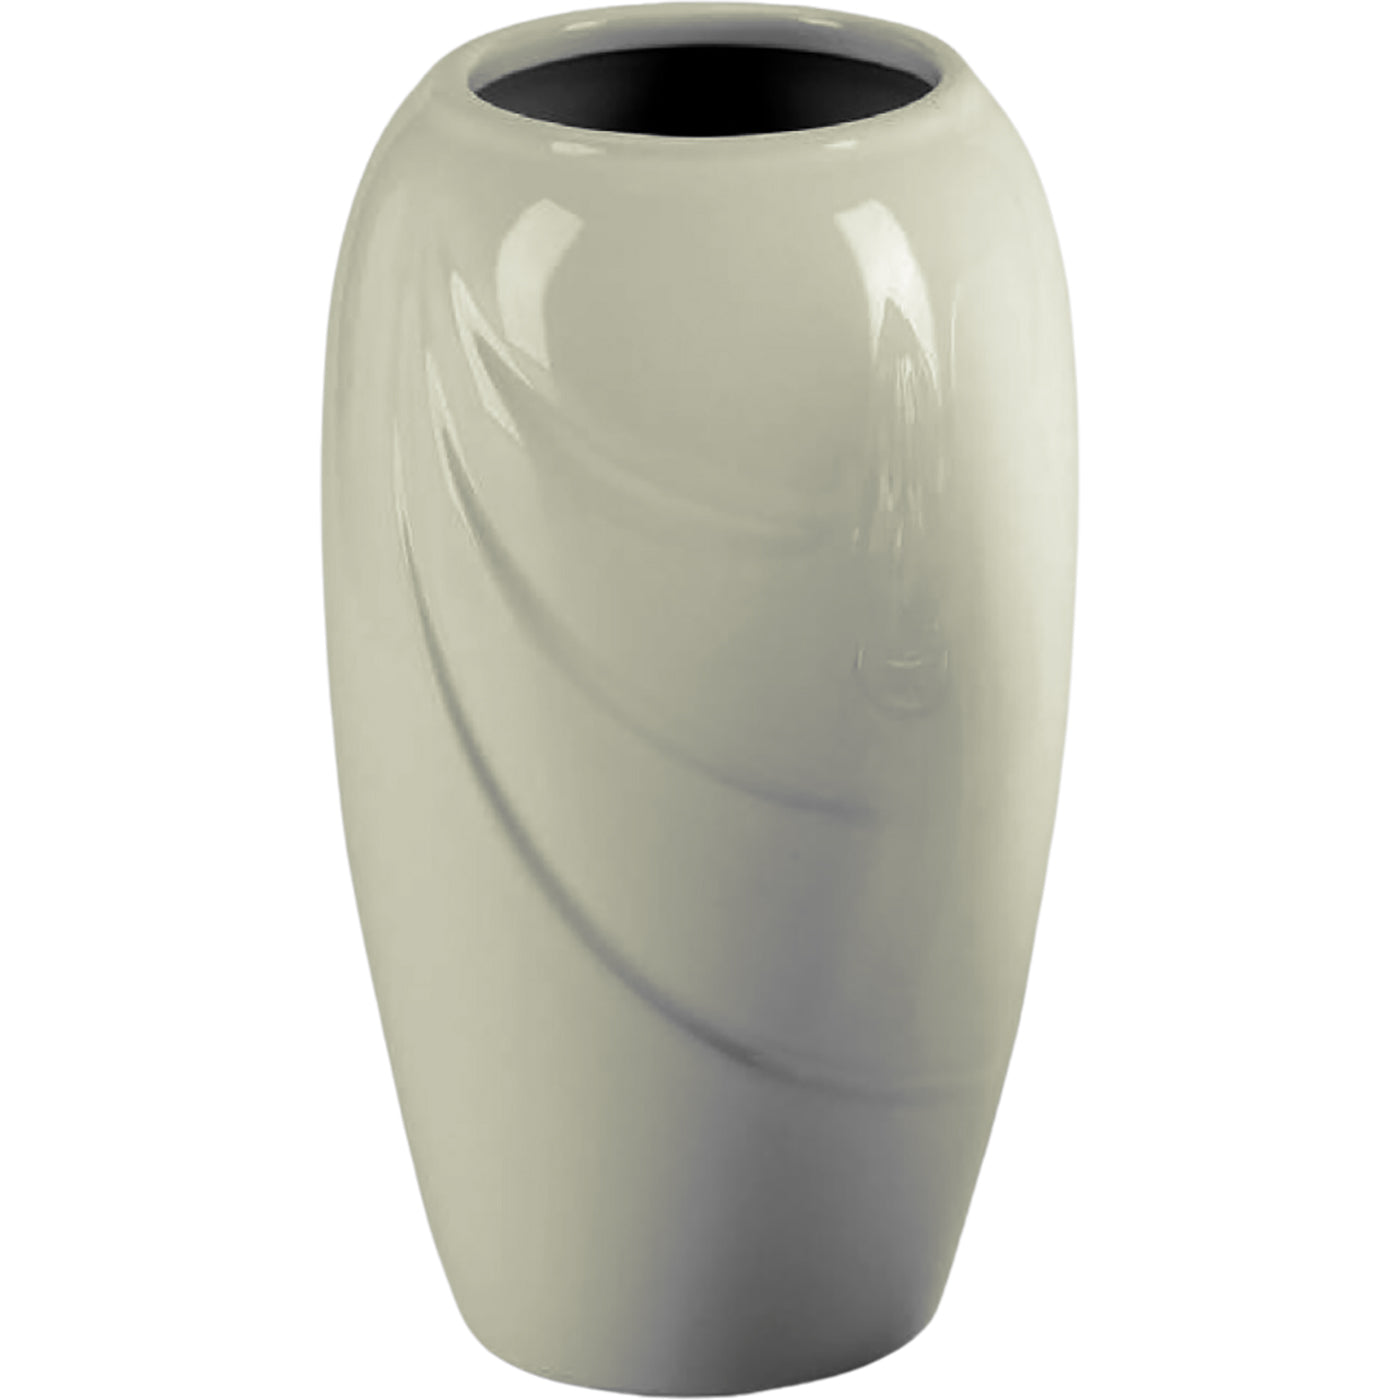 Grave vase Ecotre ivory 21x13cm - 8.3x5.1in In ivory porcelain, wall attached ECO150P/A